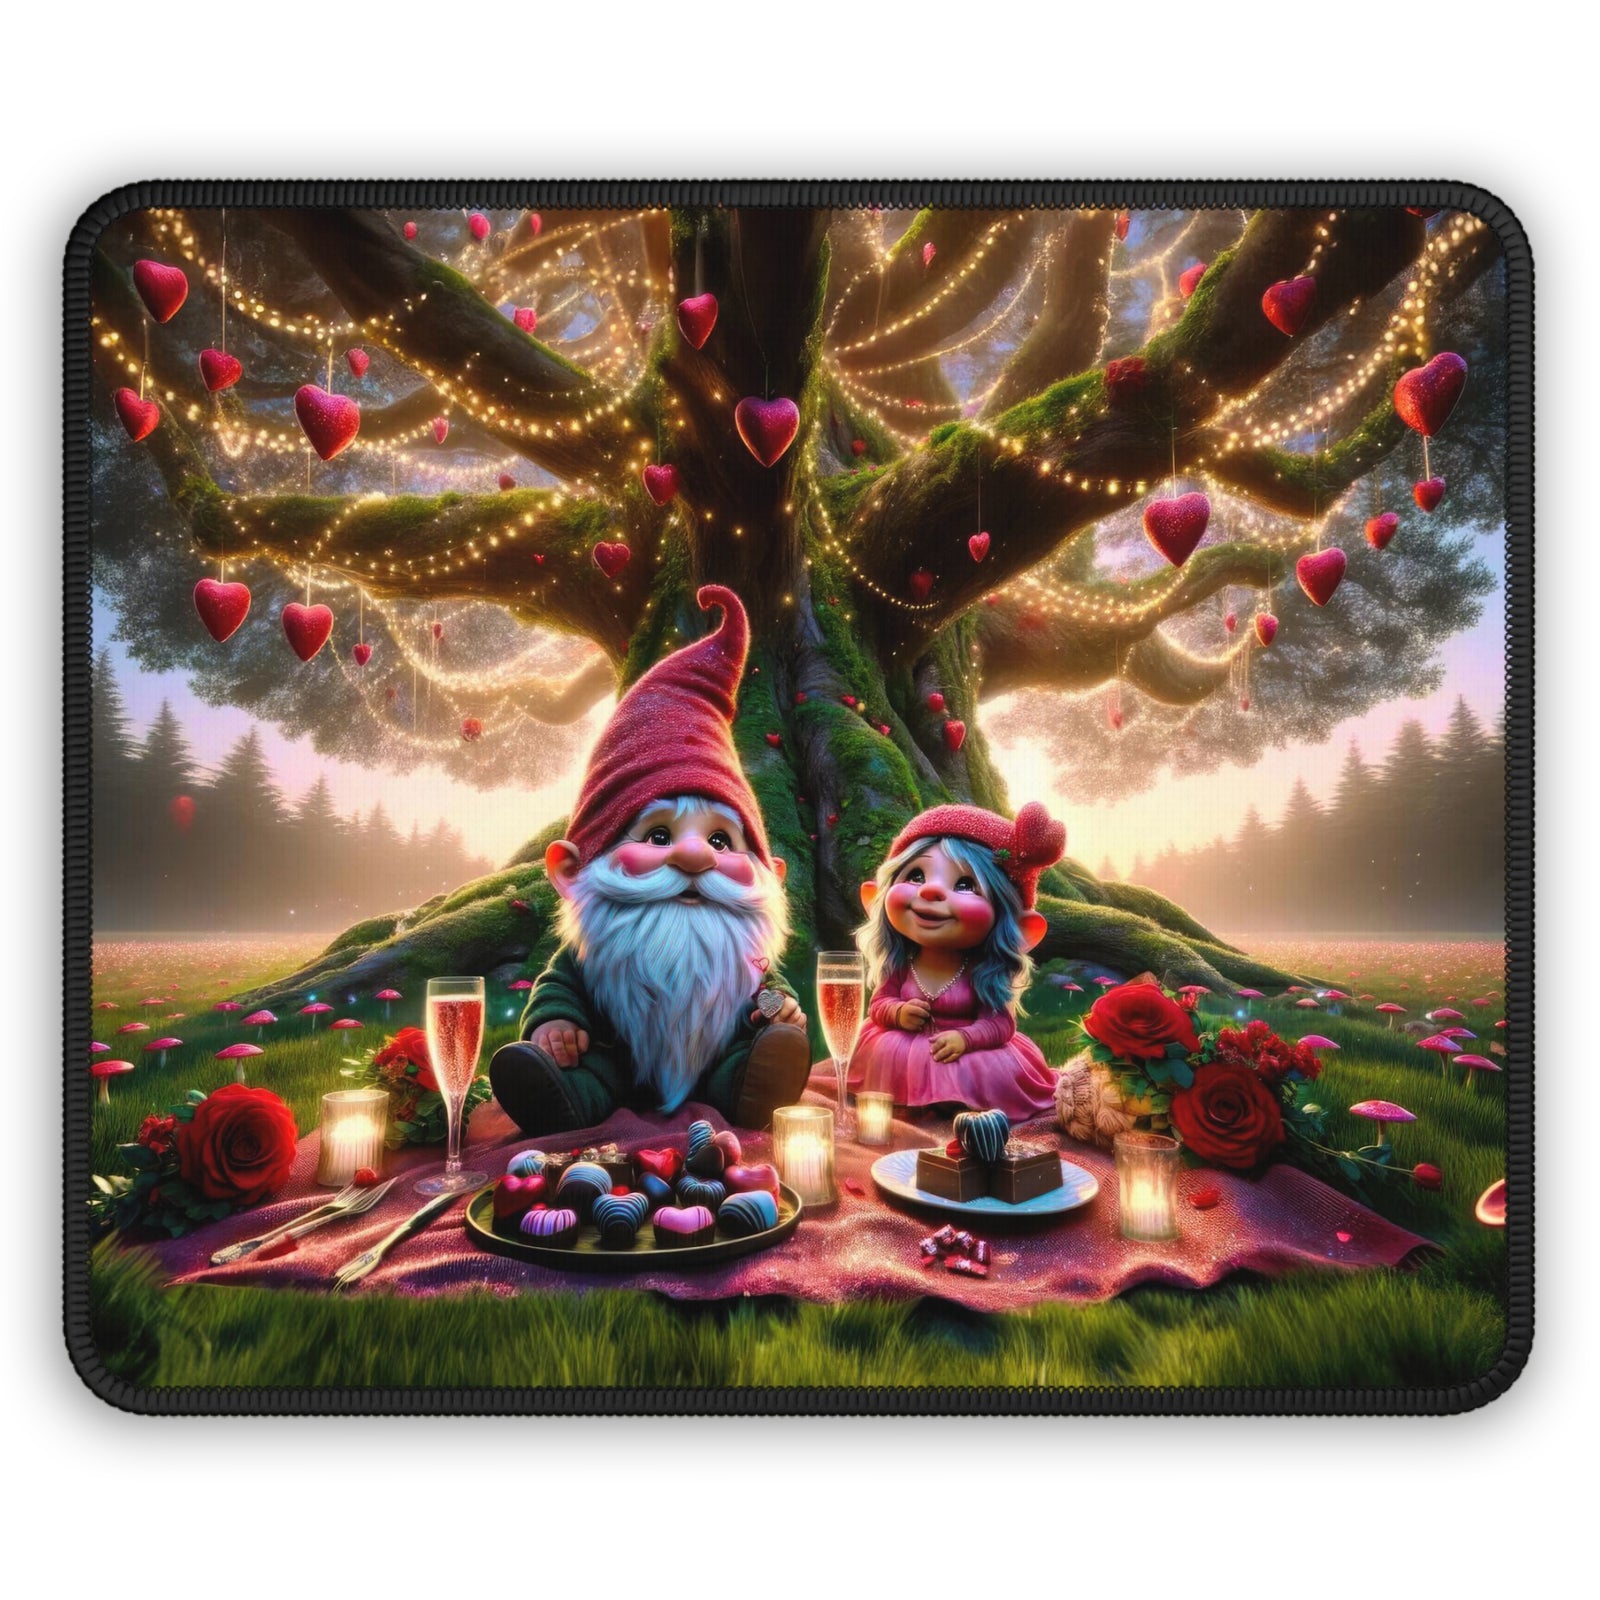 Enchanted Valentine's Eve in the Whimsical Woodlands Gaming Mouse Pad